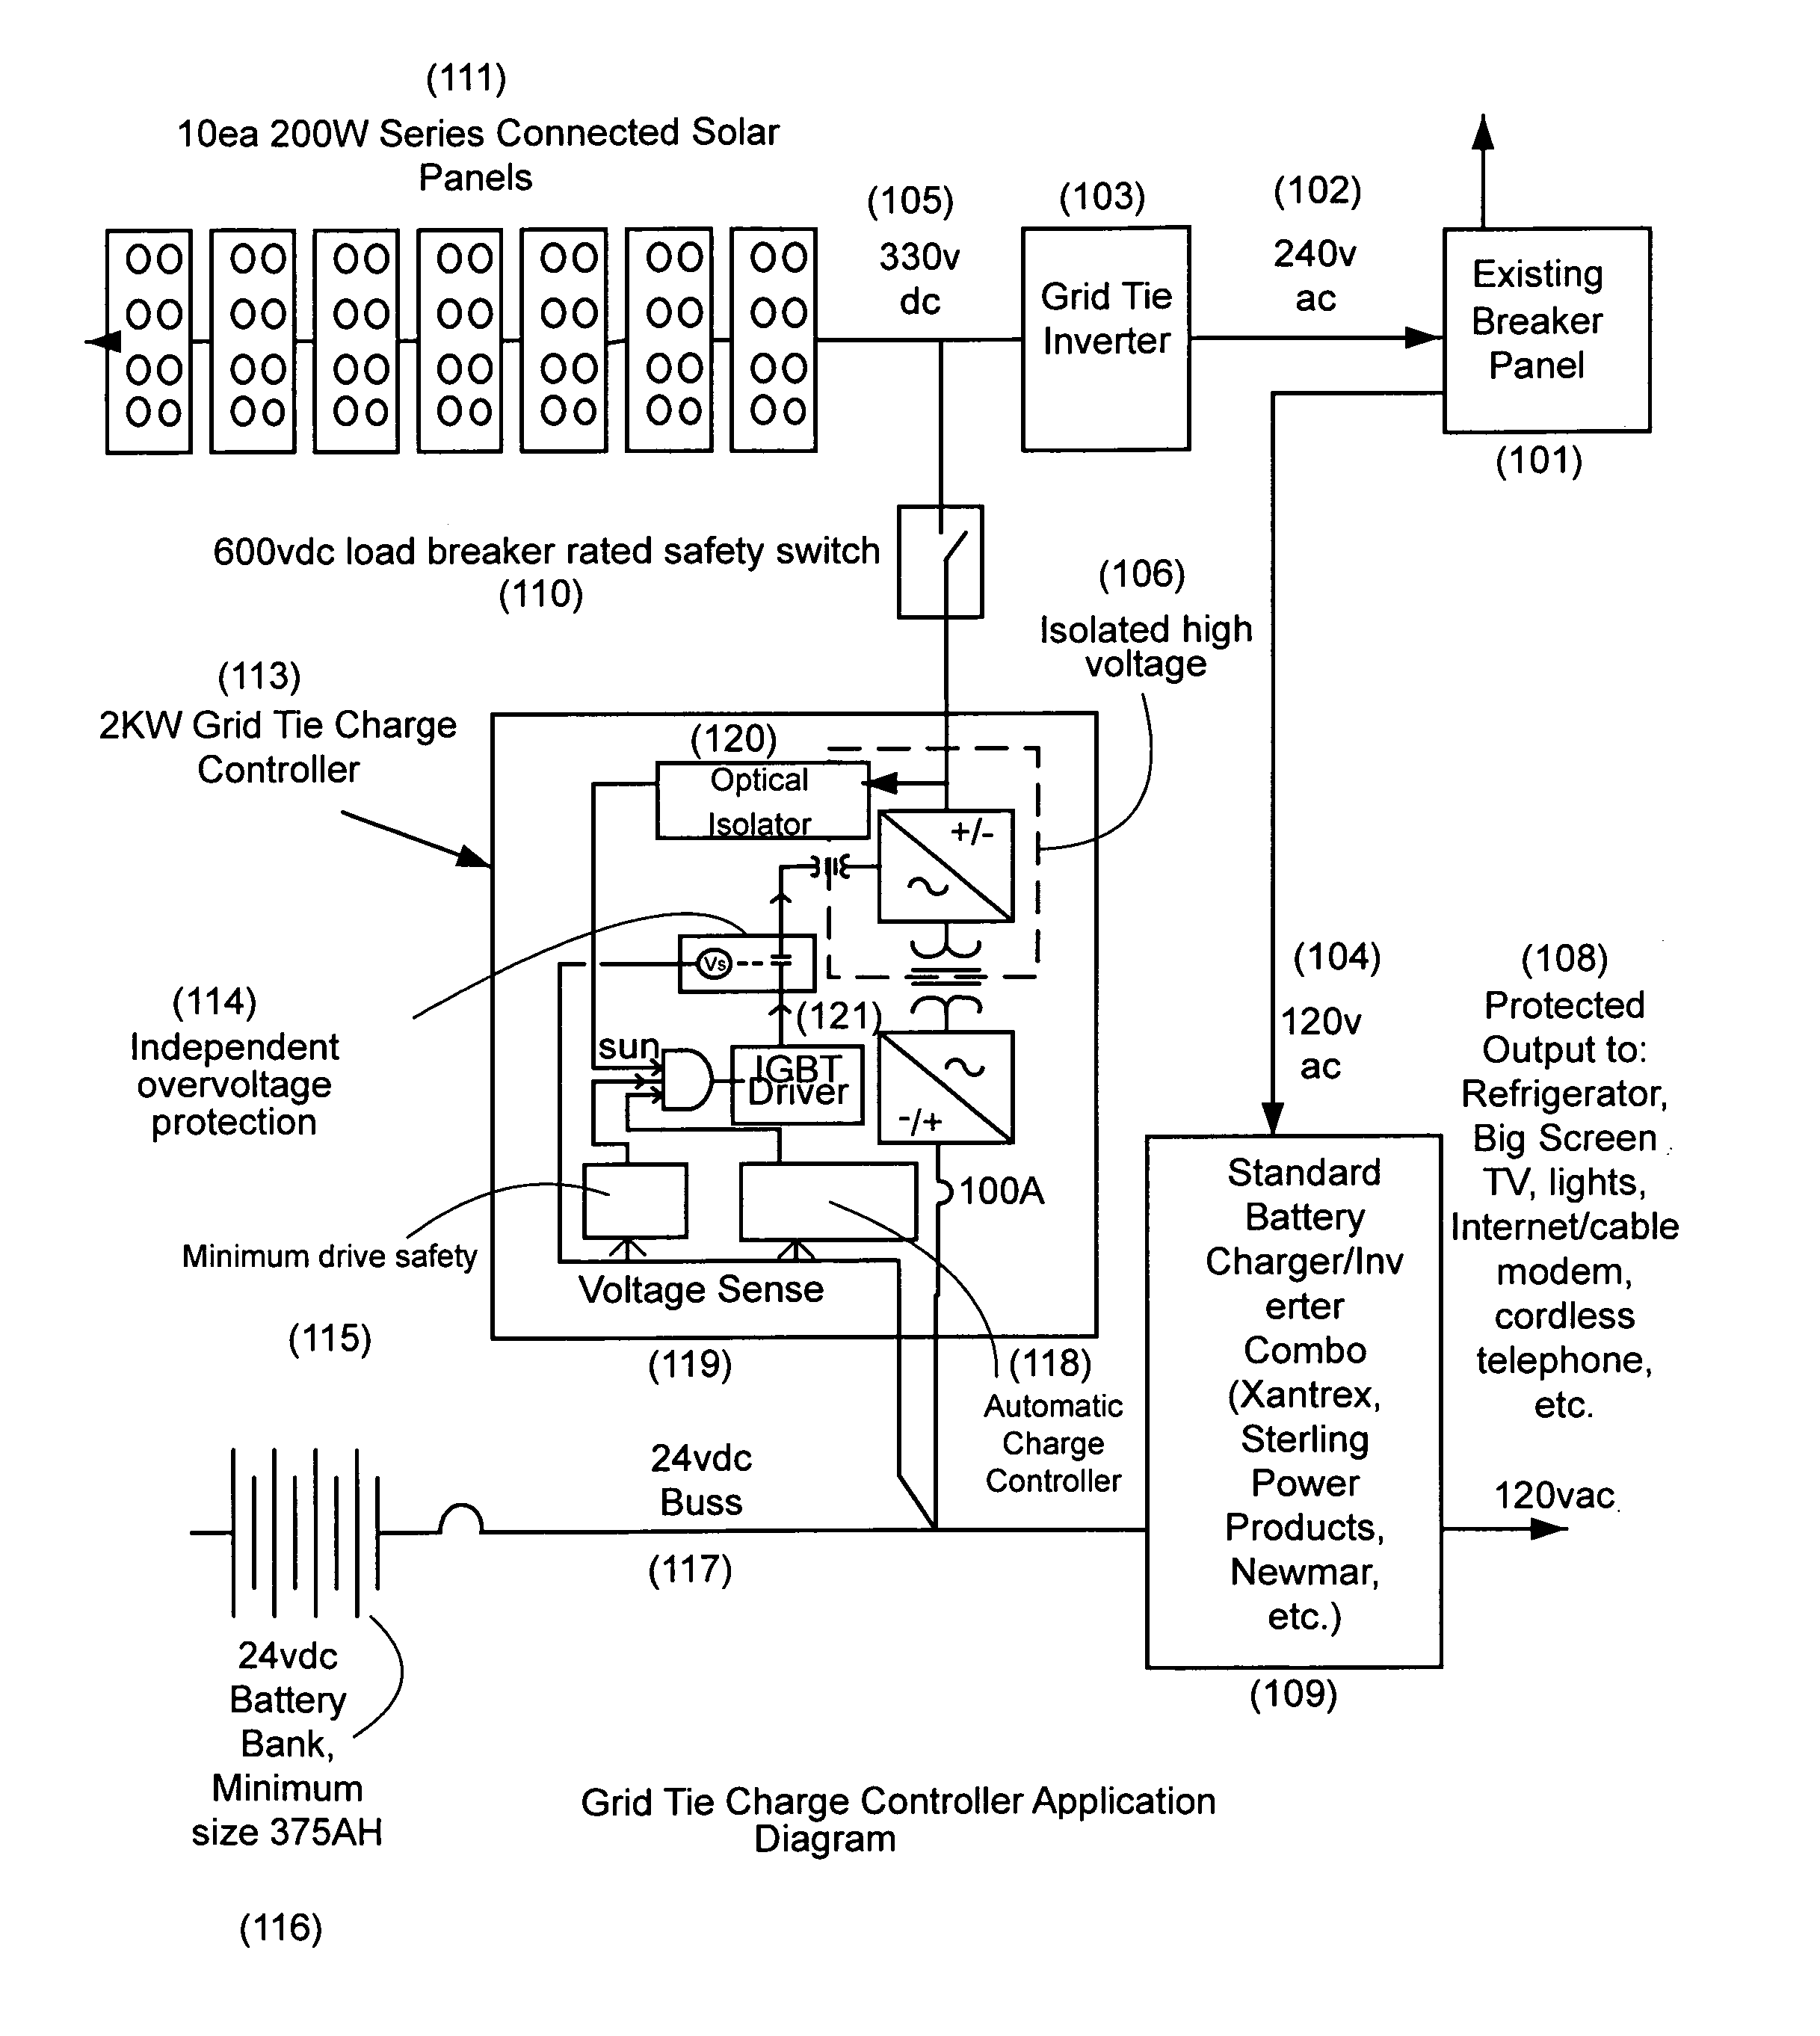 Grid tie charge controller